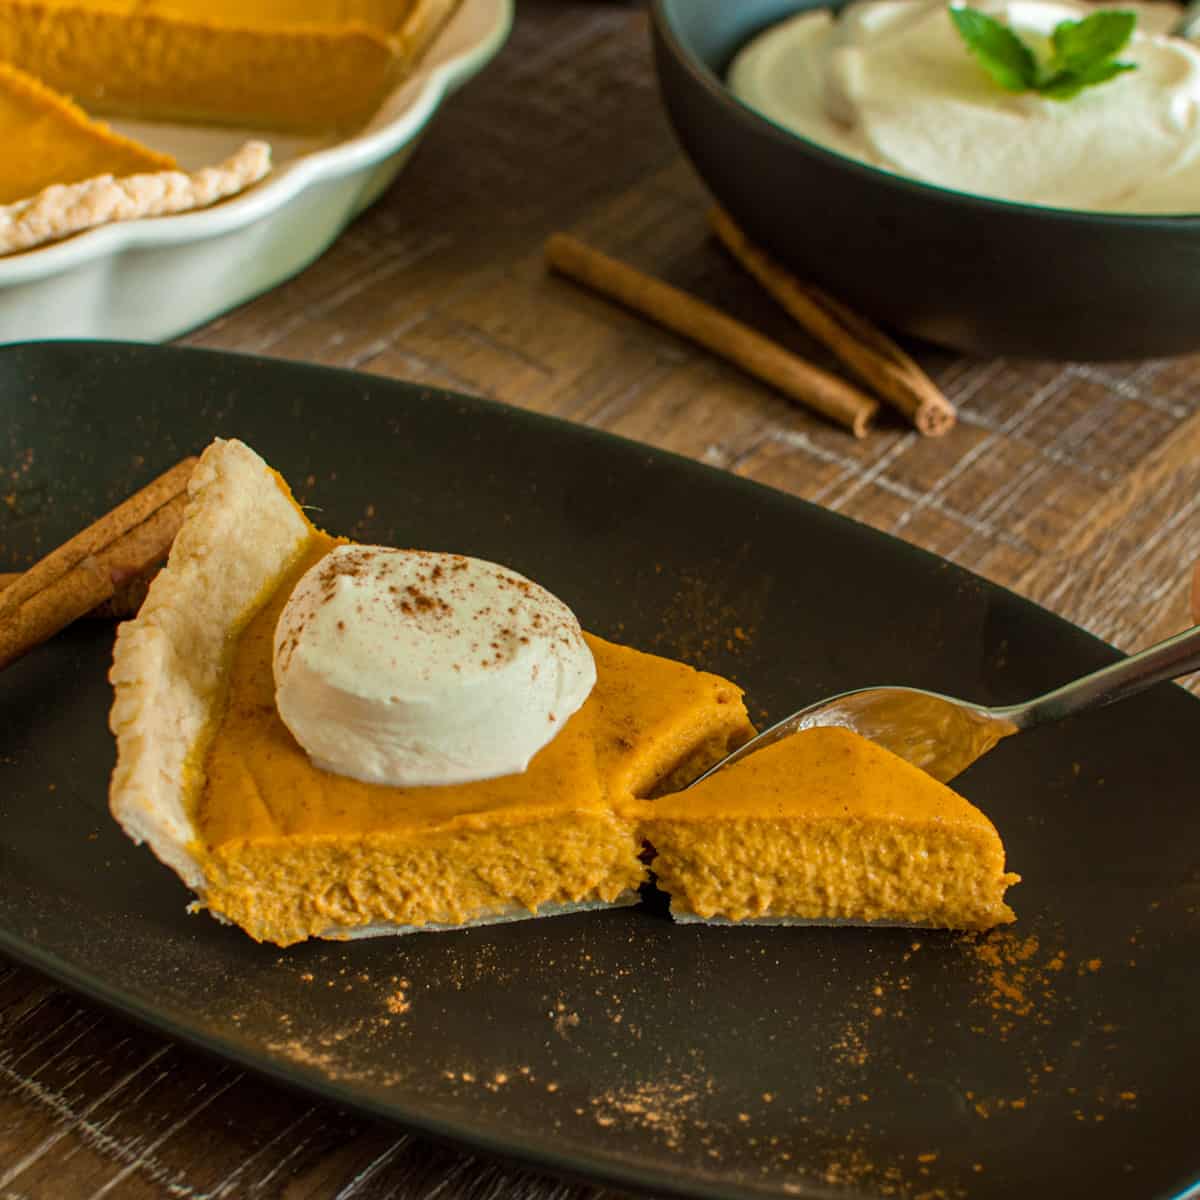 Slice of Pumpkin Pie with whipped cream and a fork cutting into it